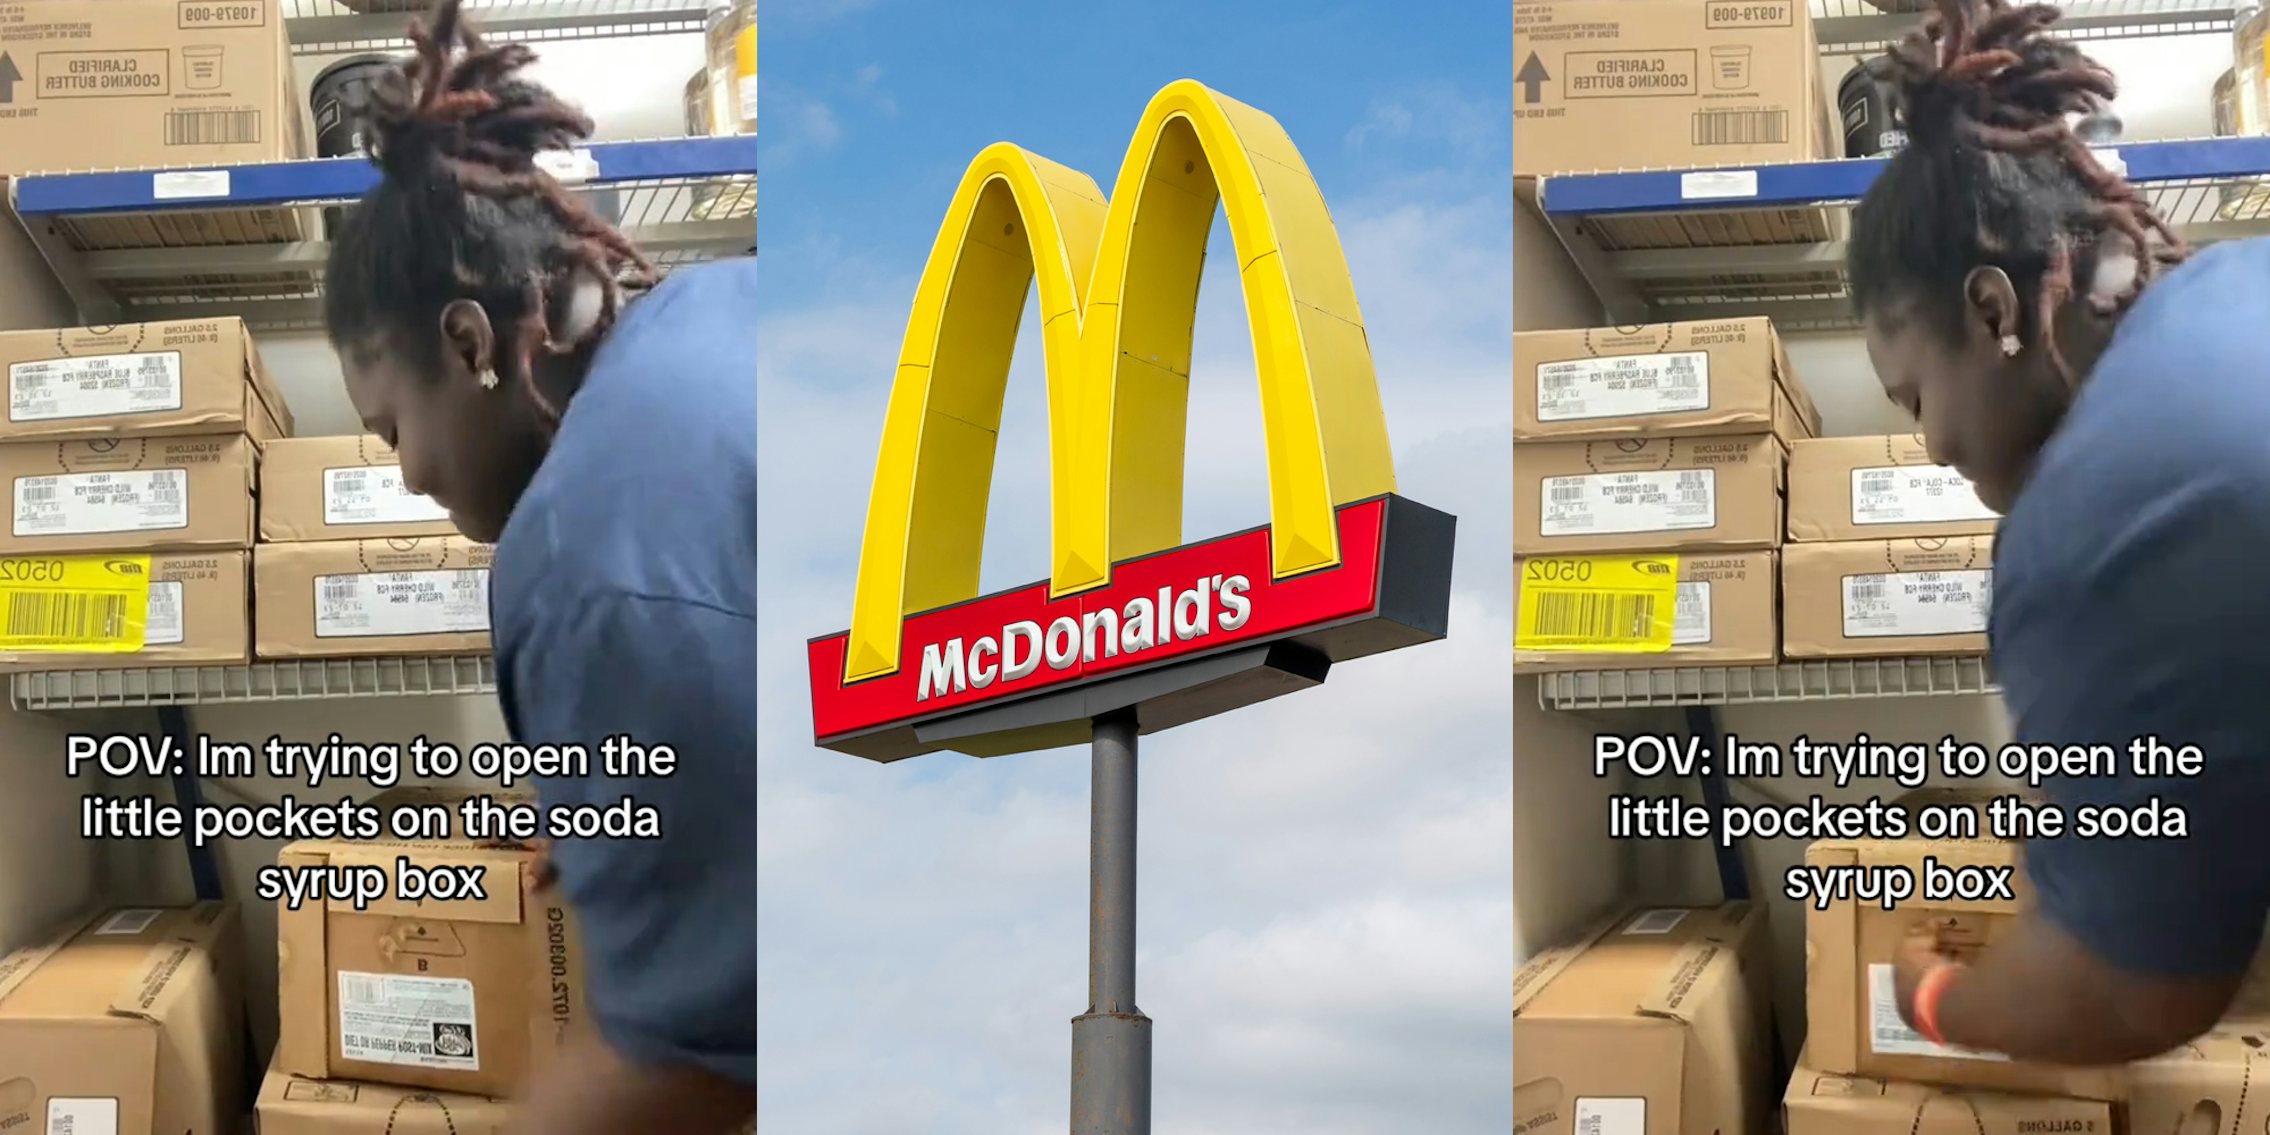 McDonald's employee punching cardboard box with caption 'POV: I'm trying to open the little pockets on the soda syrup box' (l) McDonald's sign in front of blue sky (c) McDonald's employee punching cardboard box with caption 'POV: I'm trying to open the little pockets on the soda syrup box' (r)